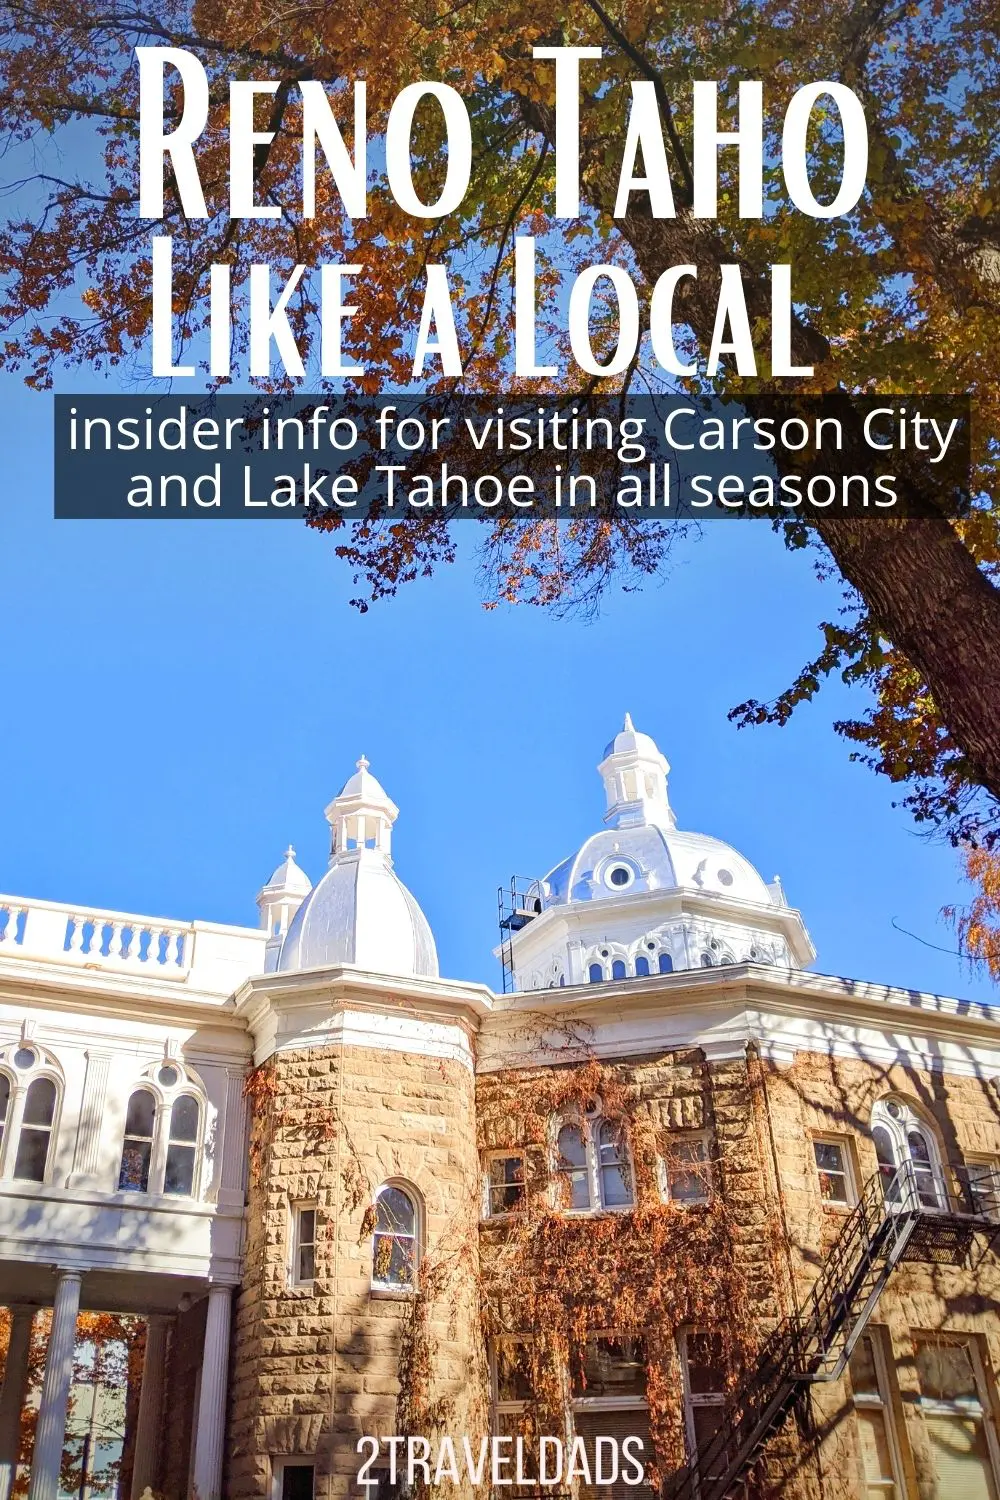 Visiting Lake Tahoe and Carson City is great any time of year when you have a local's insider information. Tips of when to visit and where to find great travel deals to the Reno Tahoe area.